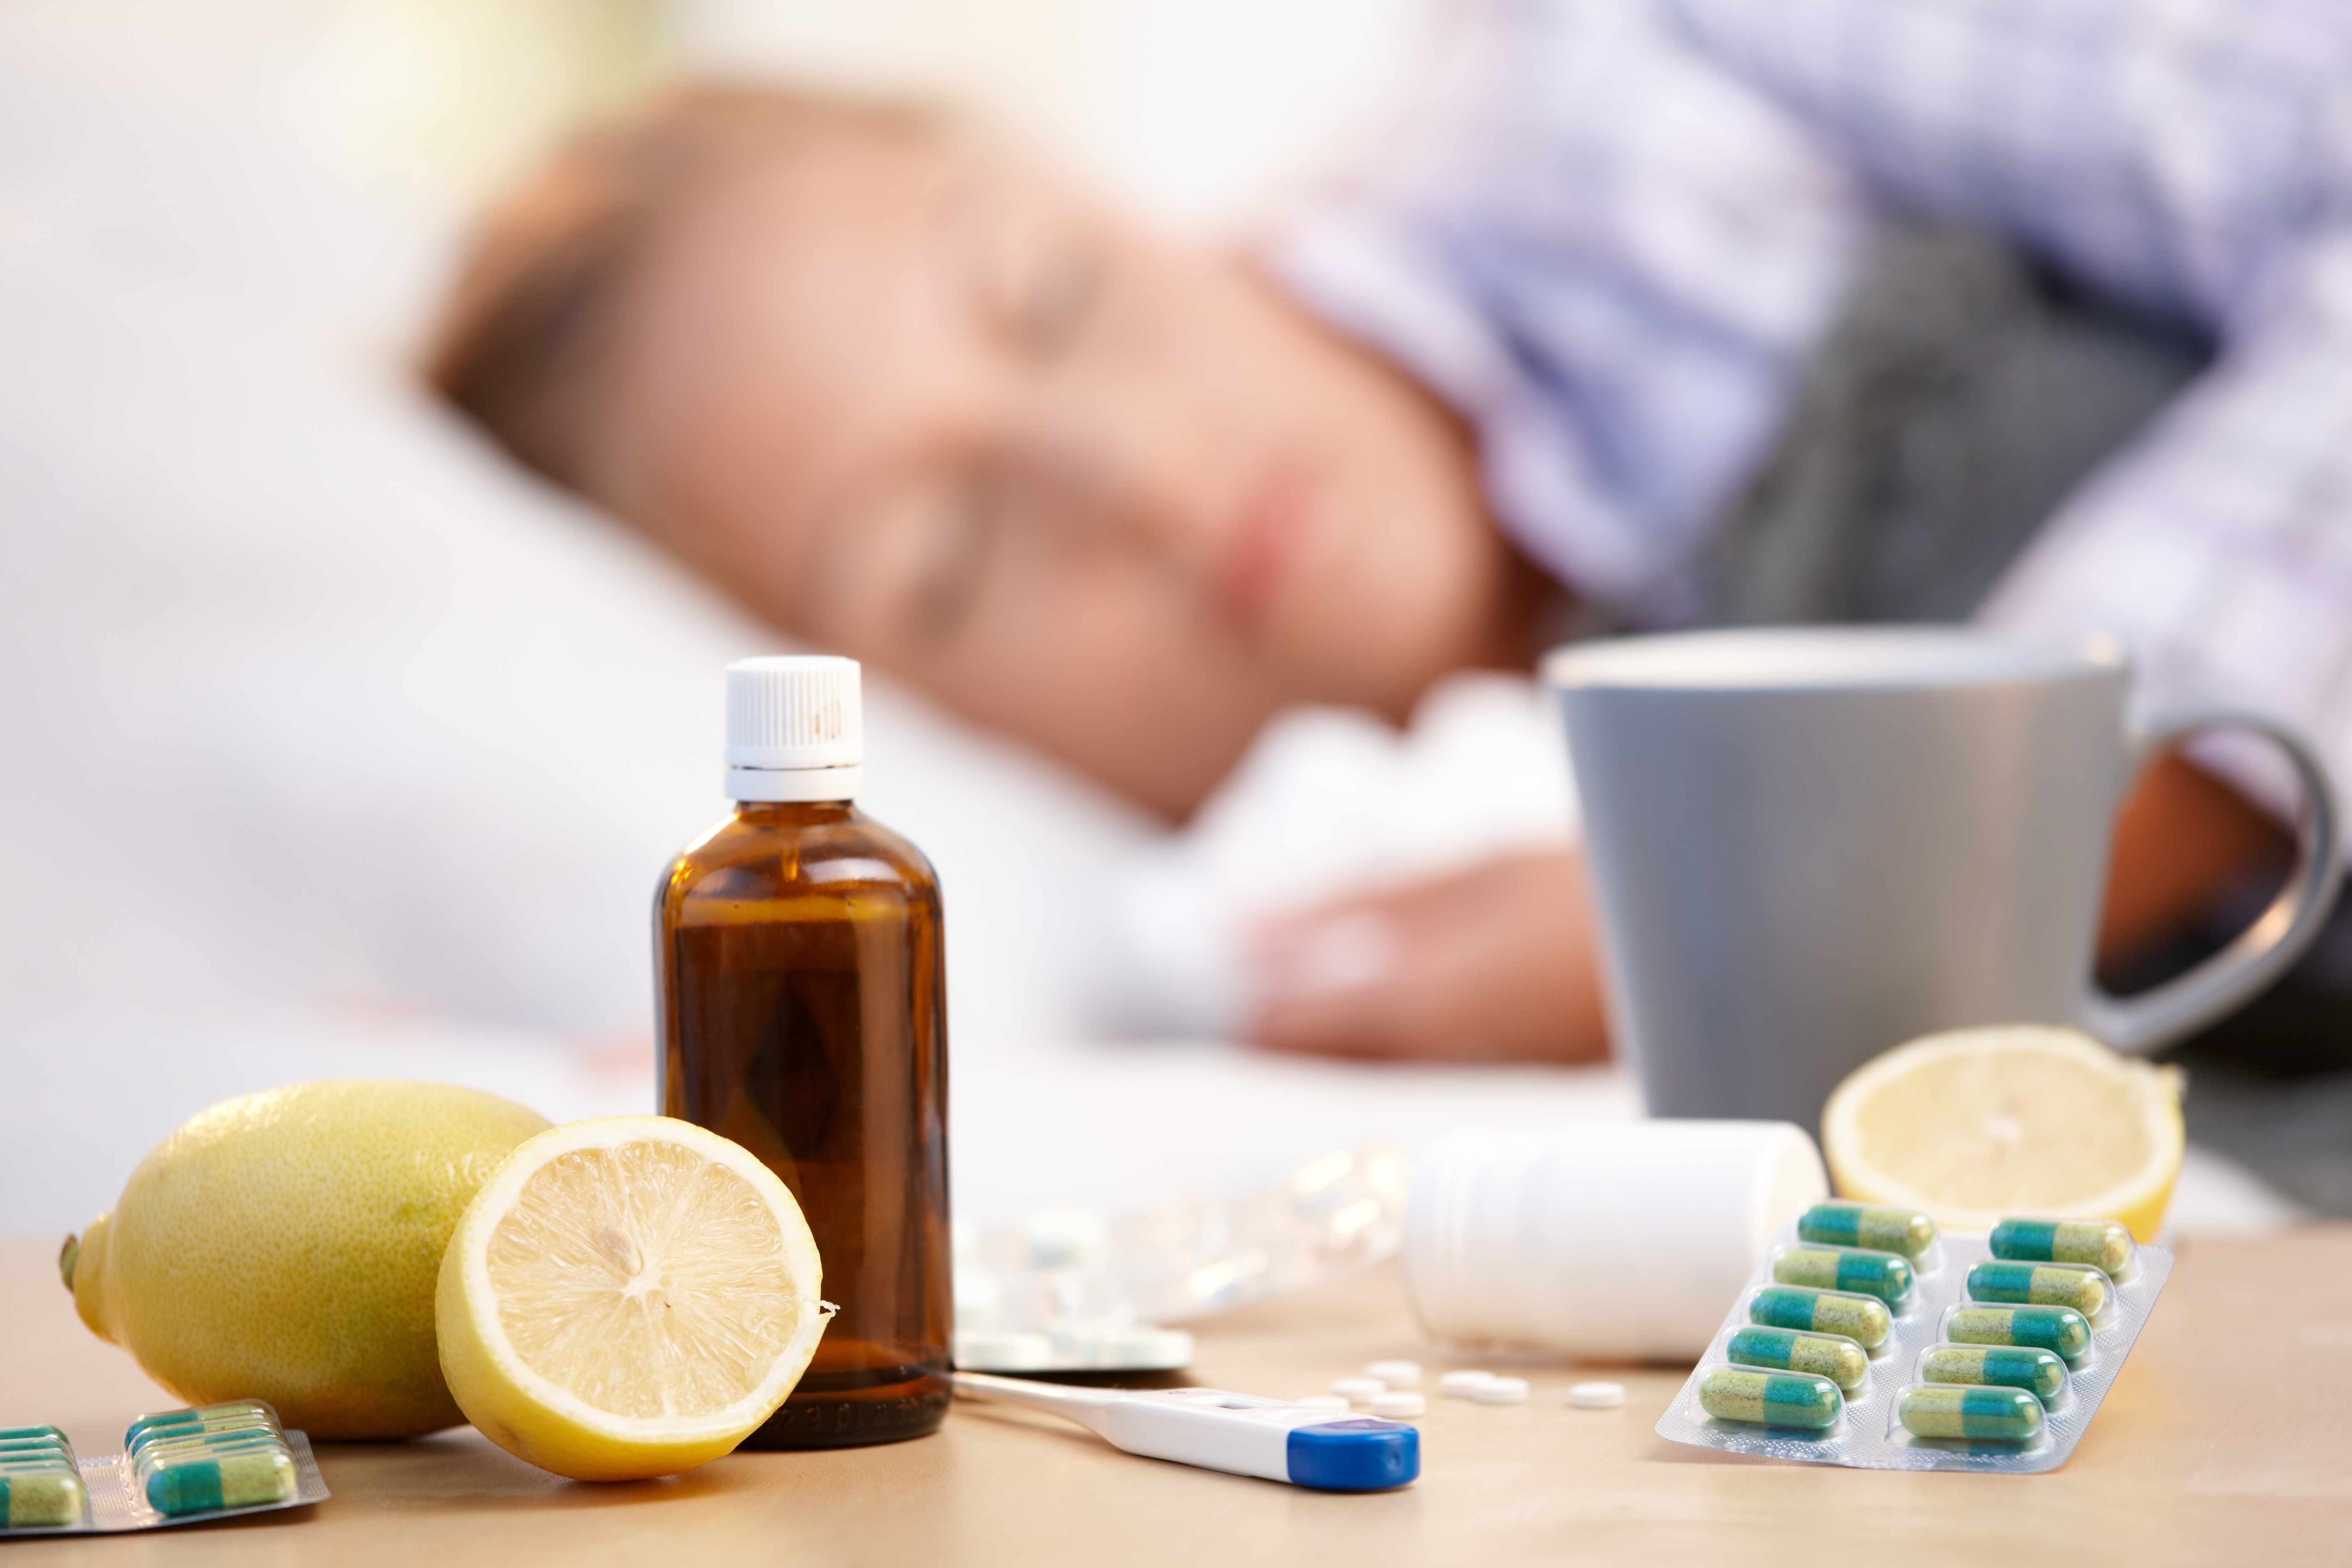 a sick person with a cold or flu, sleeping in bed with medications on the bedside table